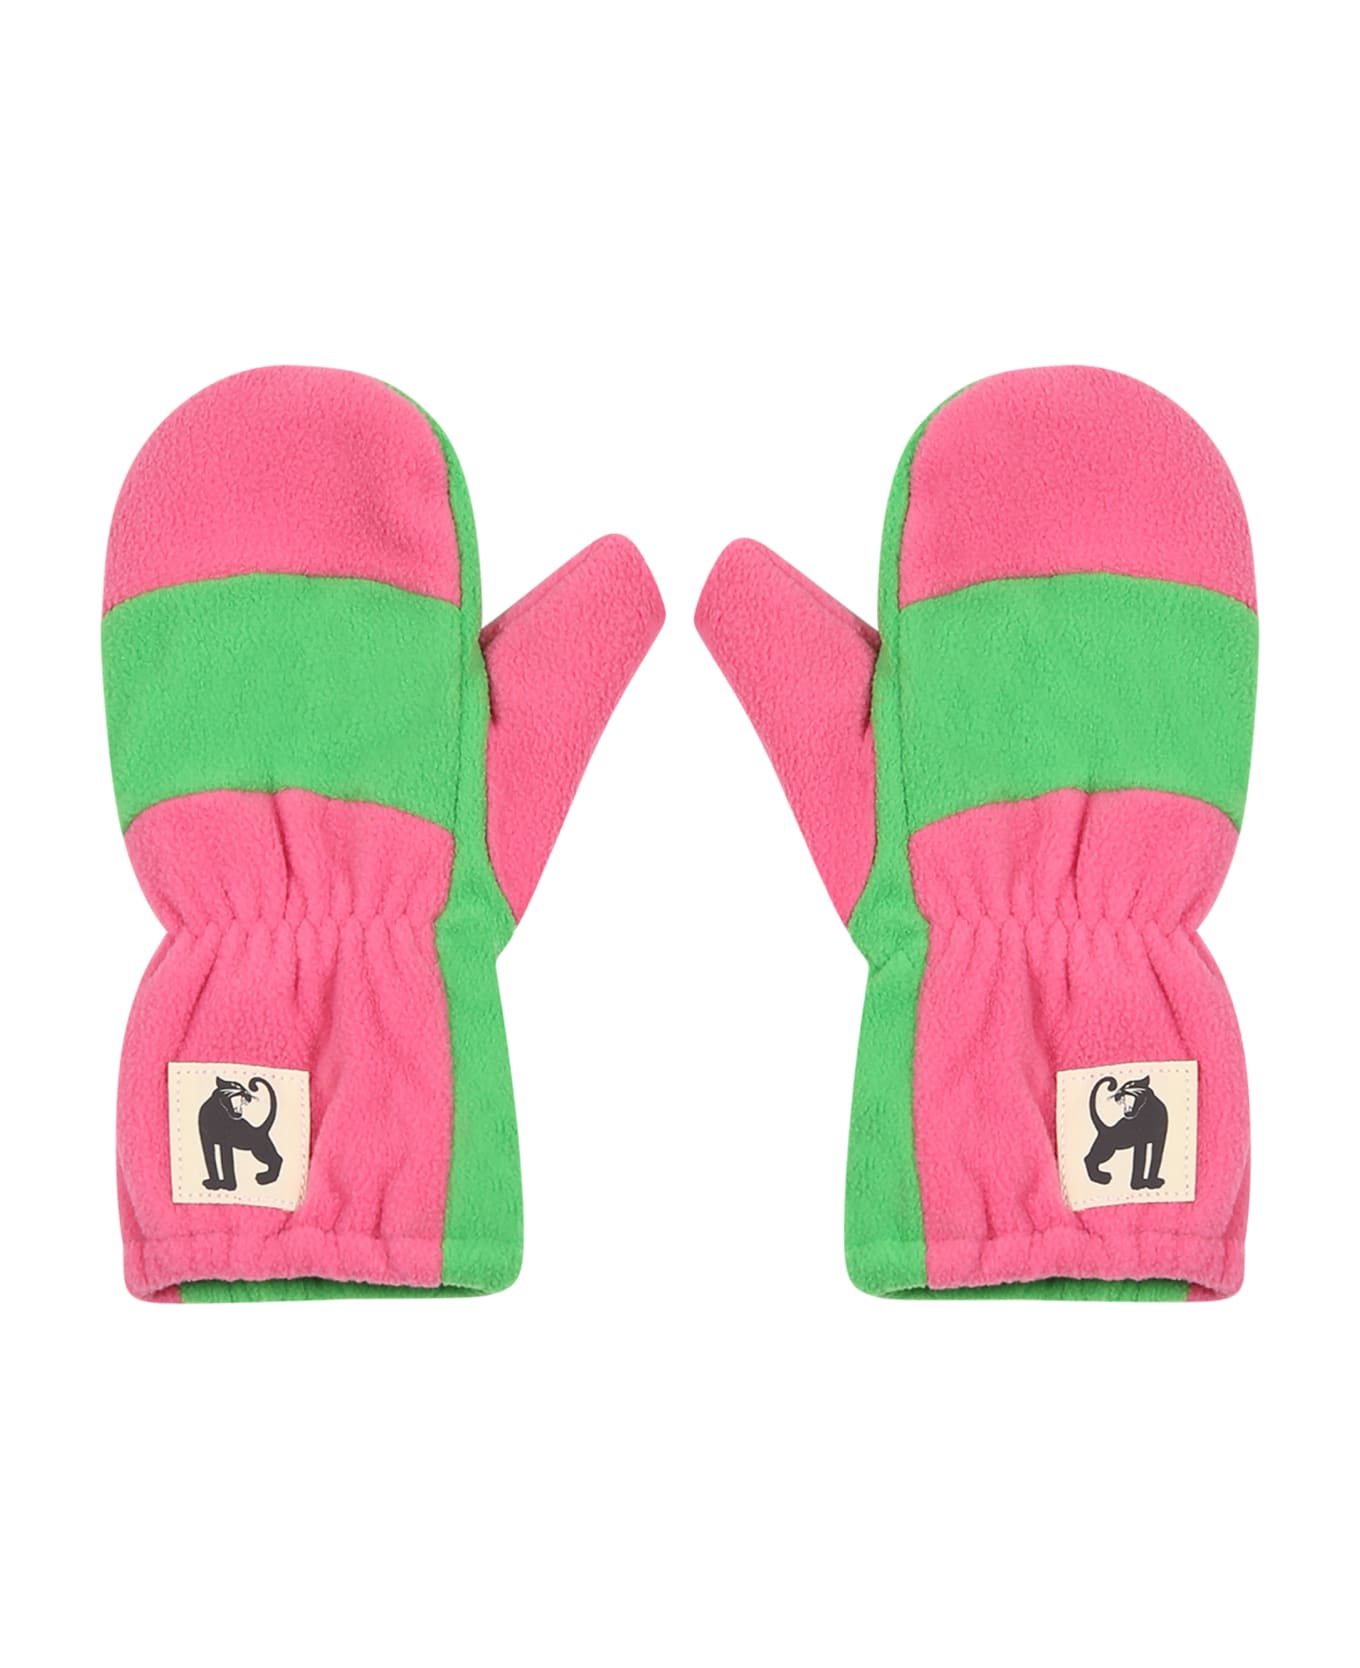 Mini Rodini Green Gloves For Girl With Panther - Multicolor アクセサリー＆ギフト